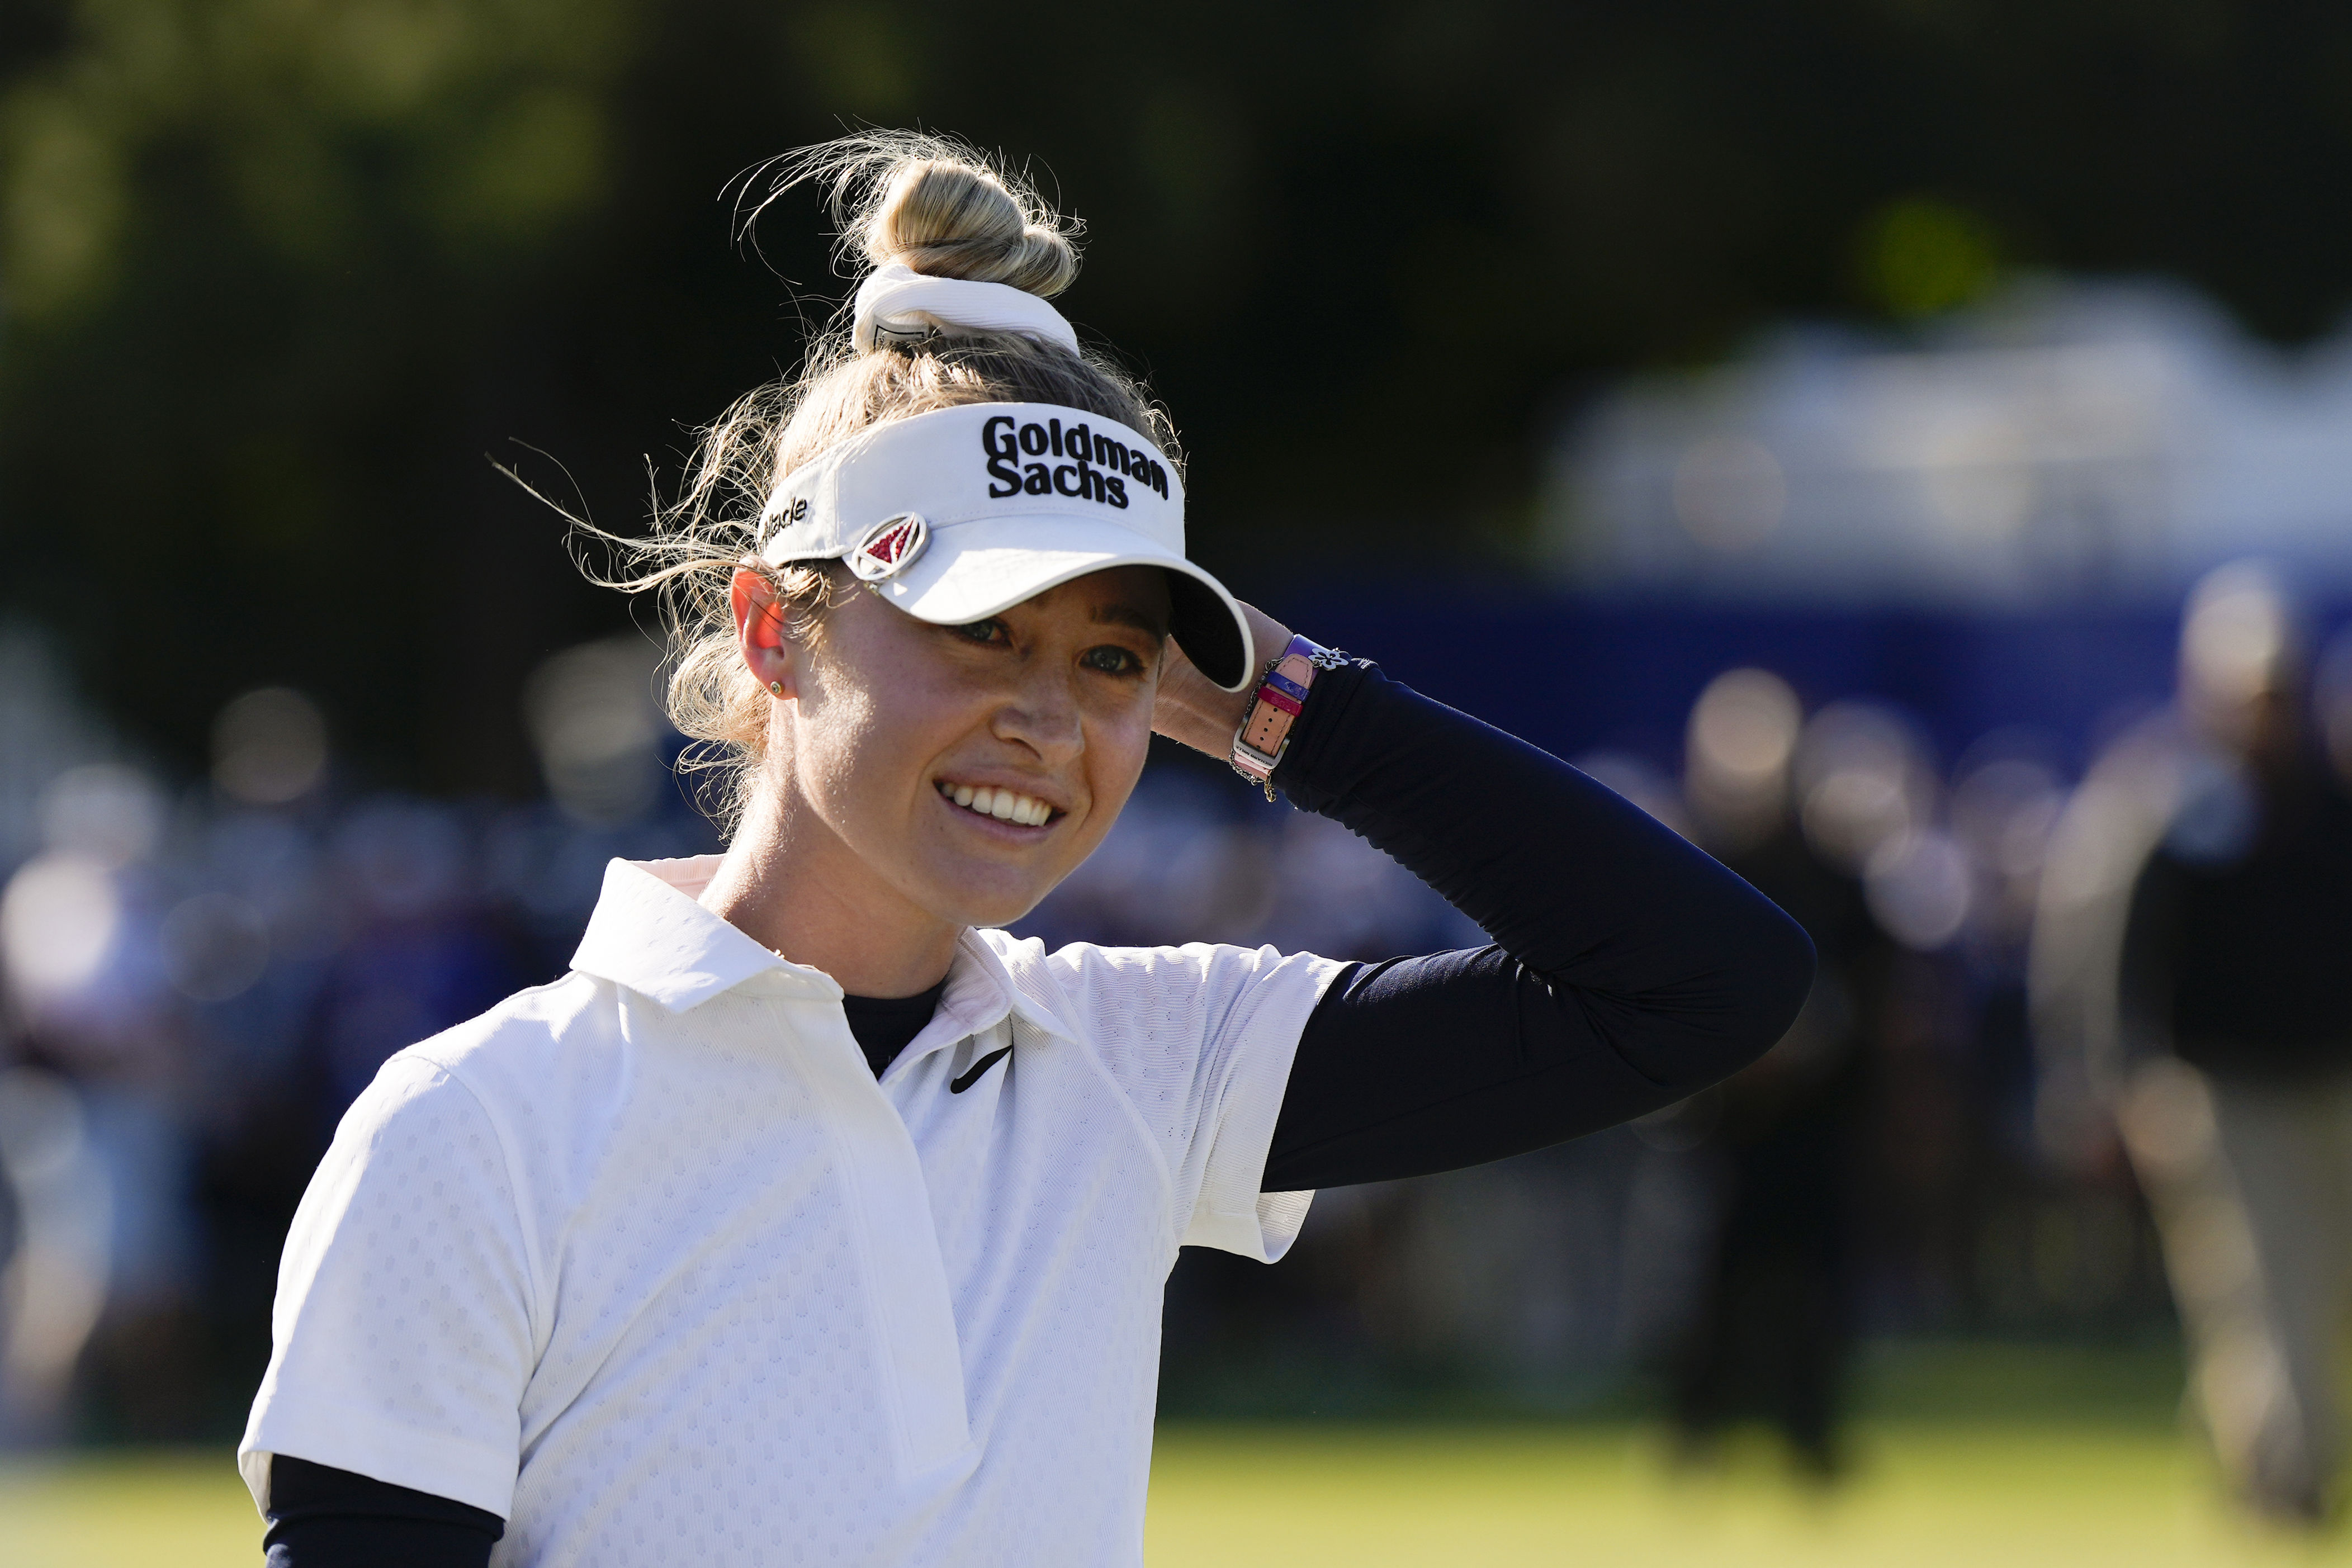 nelly korda ties lpga tour record with 5th straight victory, wins chevron championship for 2nd major